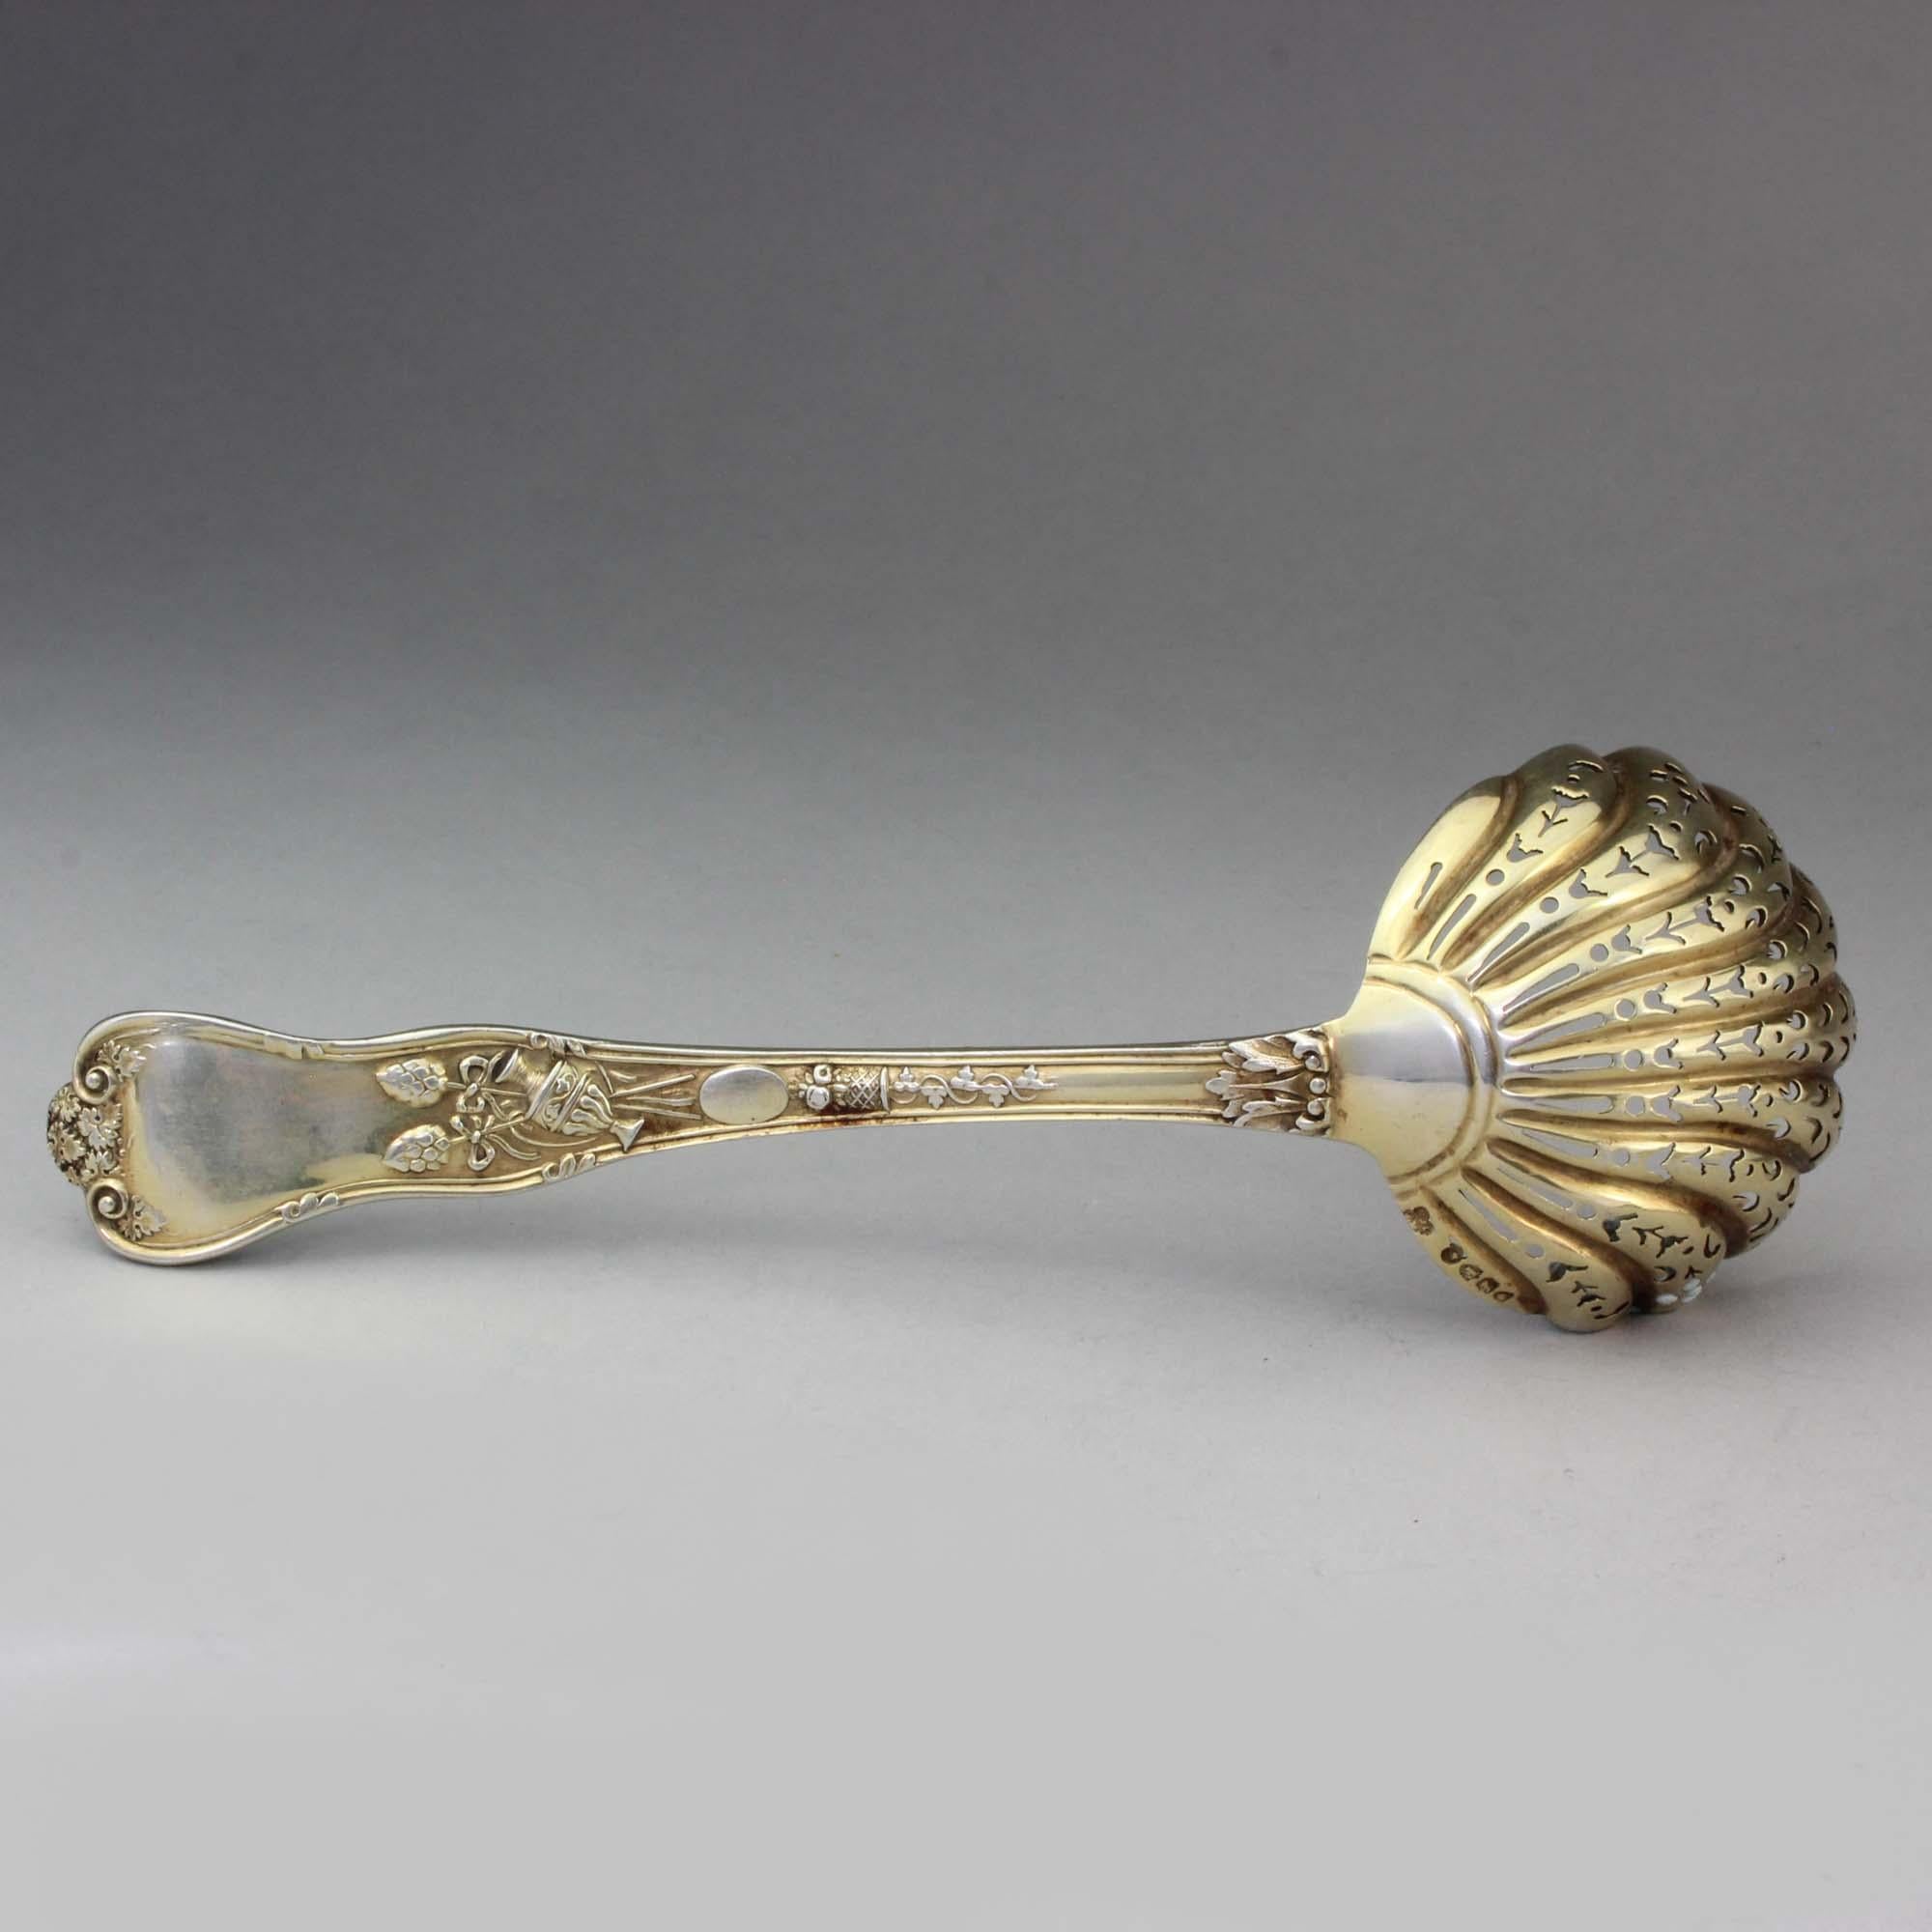 Antique silver gilt sugar sifting spoon 
The spoon has a figural decoration.

Made in England, London, 1881
Maker: Henry John Lias & James Wakely

Dimensions:
Length x width x height: 16.8 x 5.3 x 3 cm
Weight: 65 grams

Condition report: